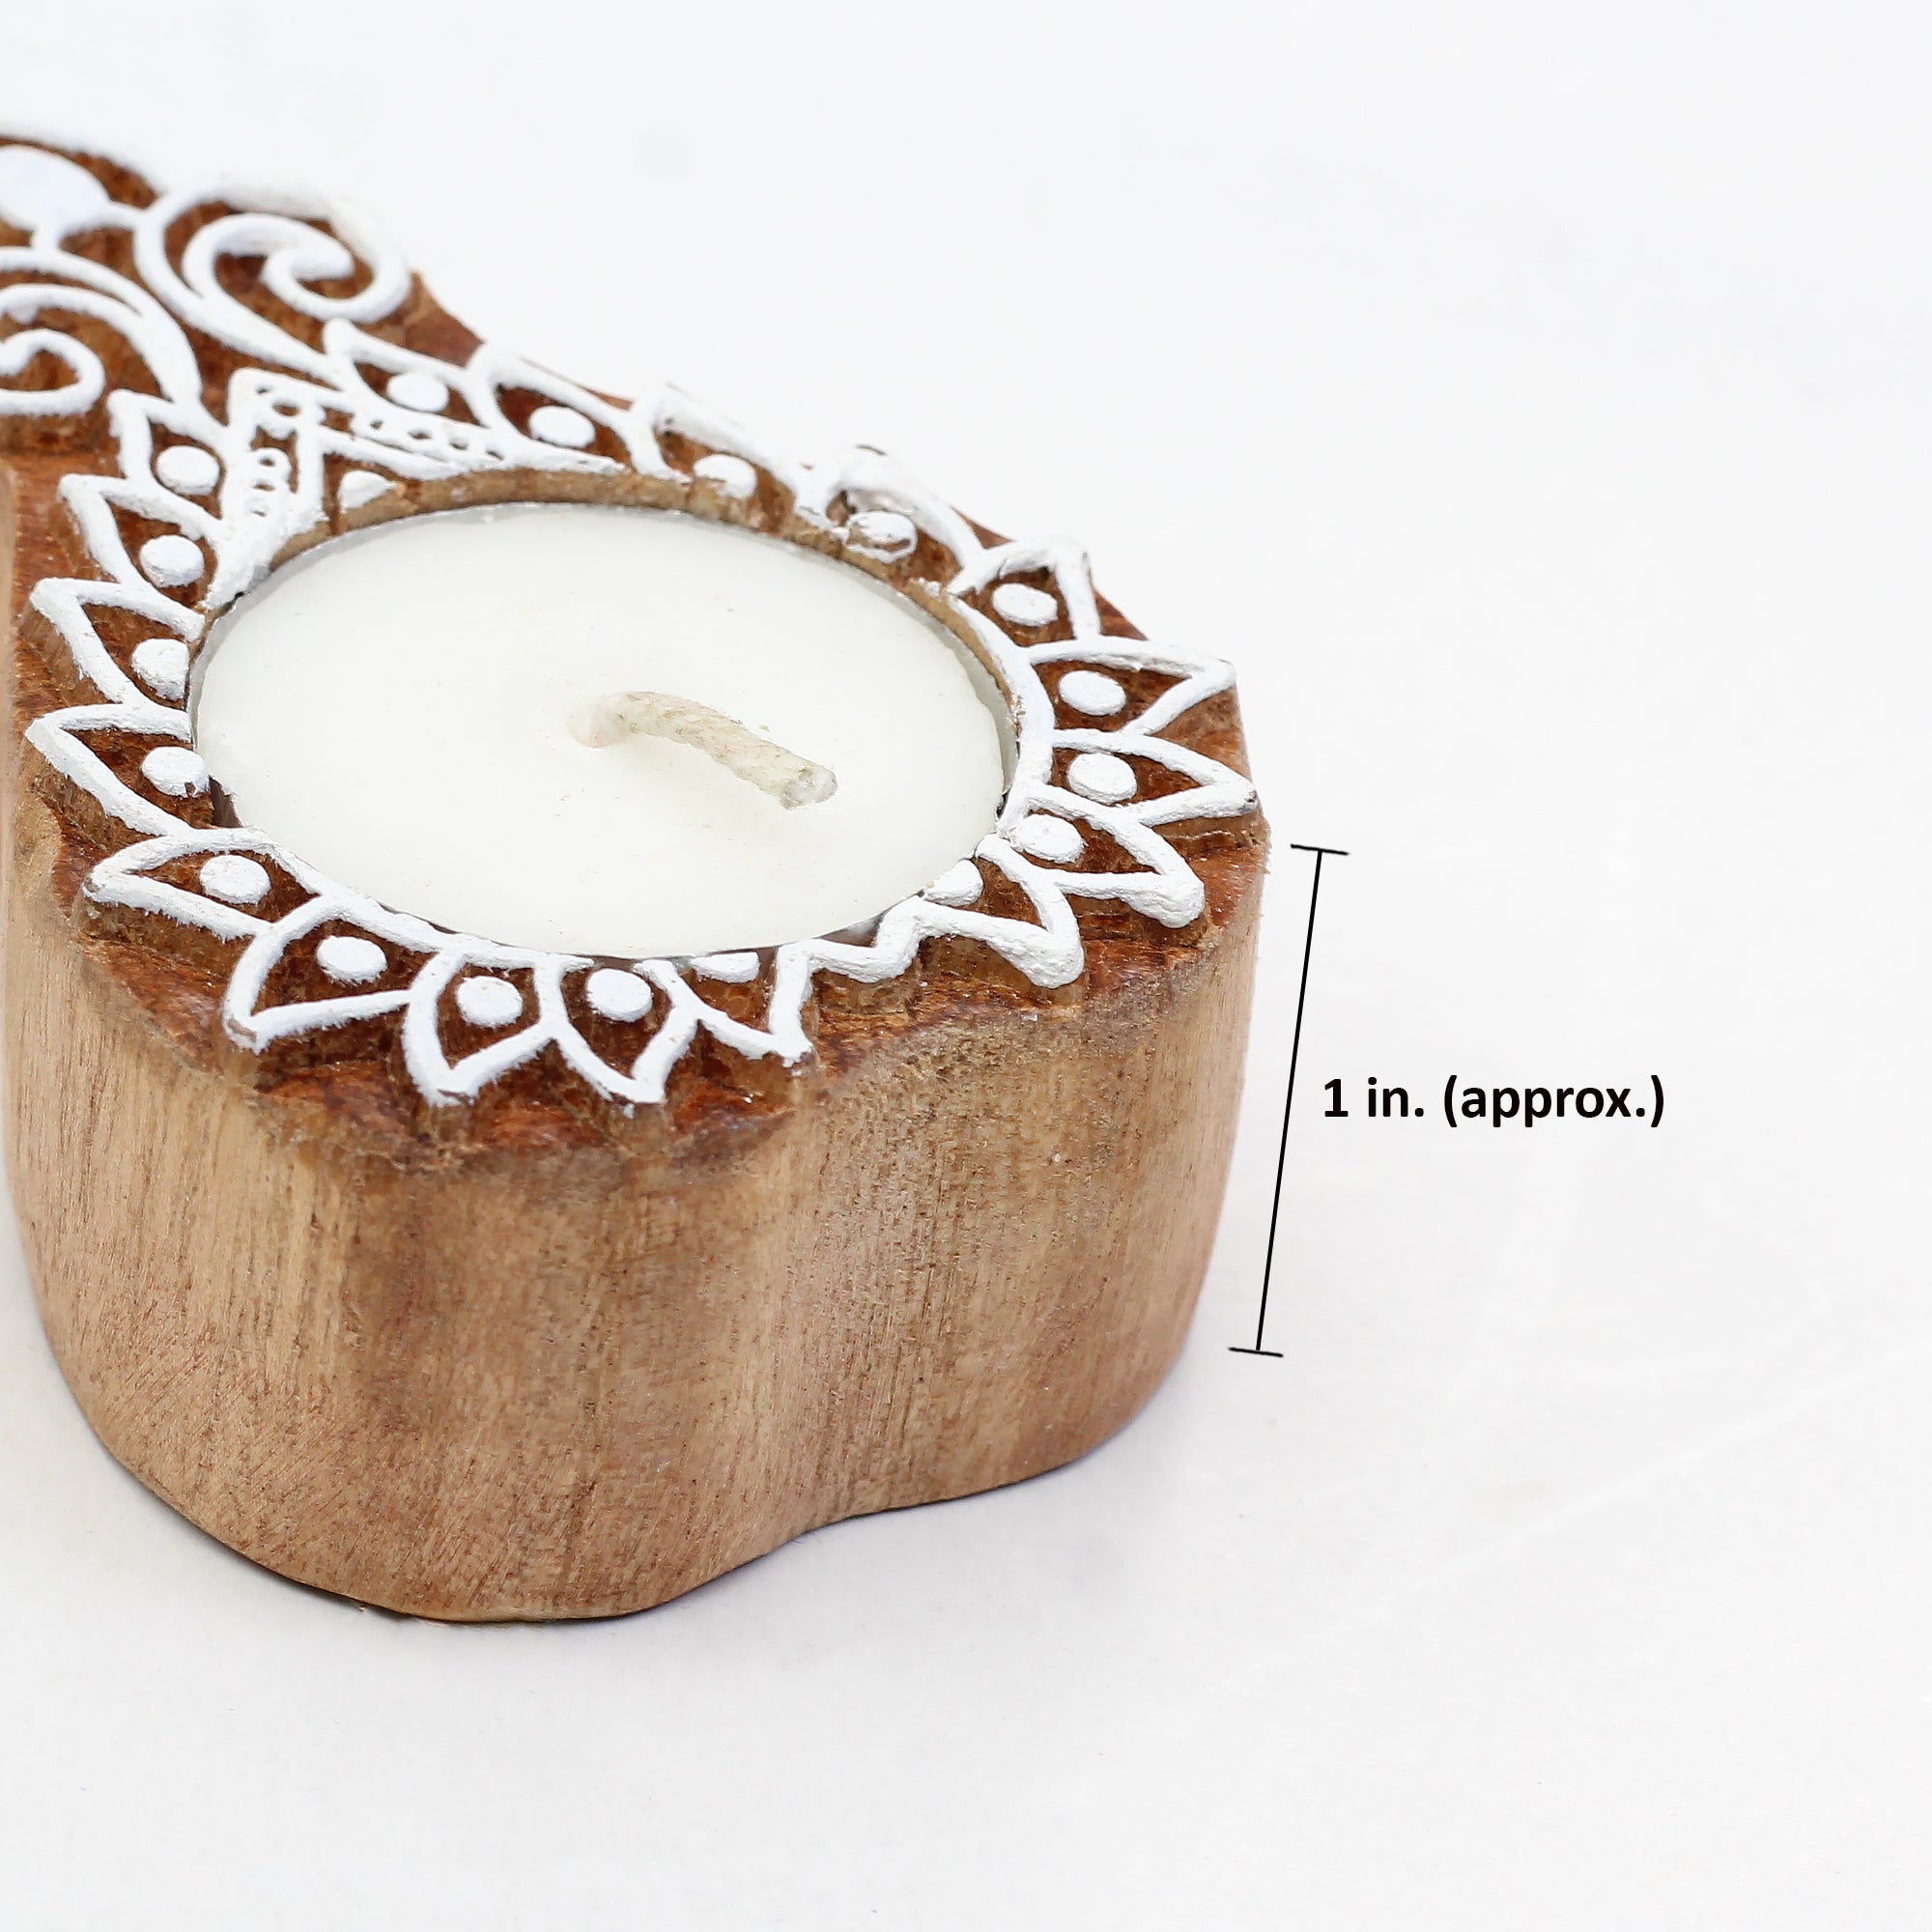 Wooden Printing Block & Candle Holder- Ethnic Flora